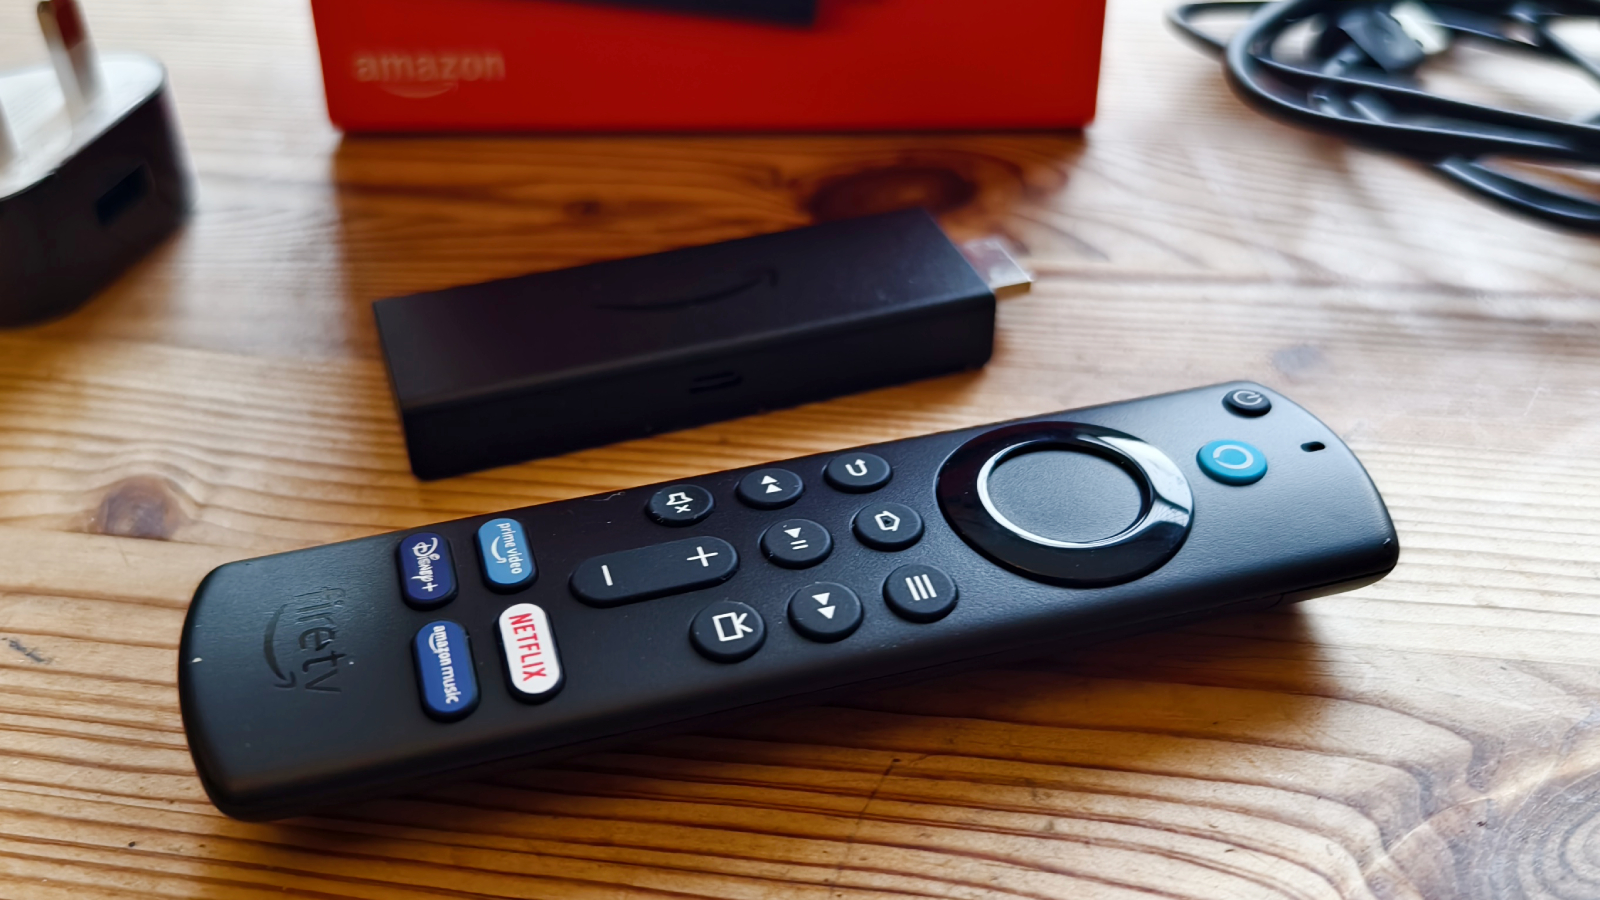 The Amazon Fire TV Stick next to its remote and box on a wooden table.